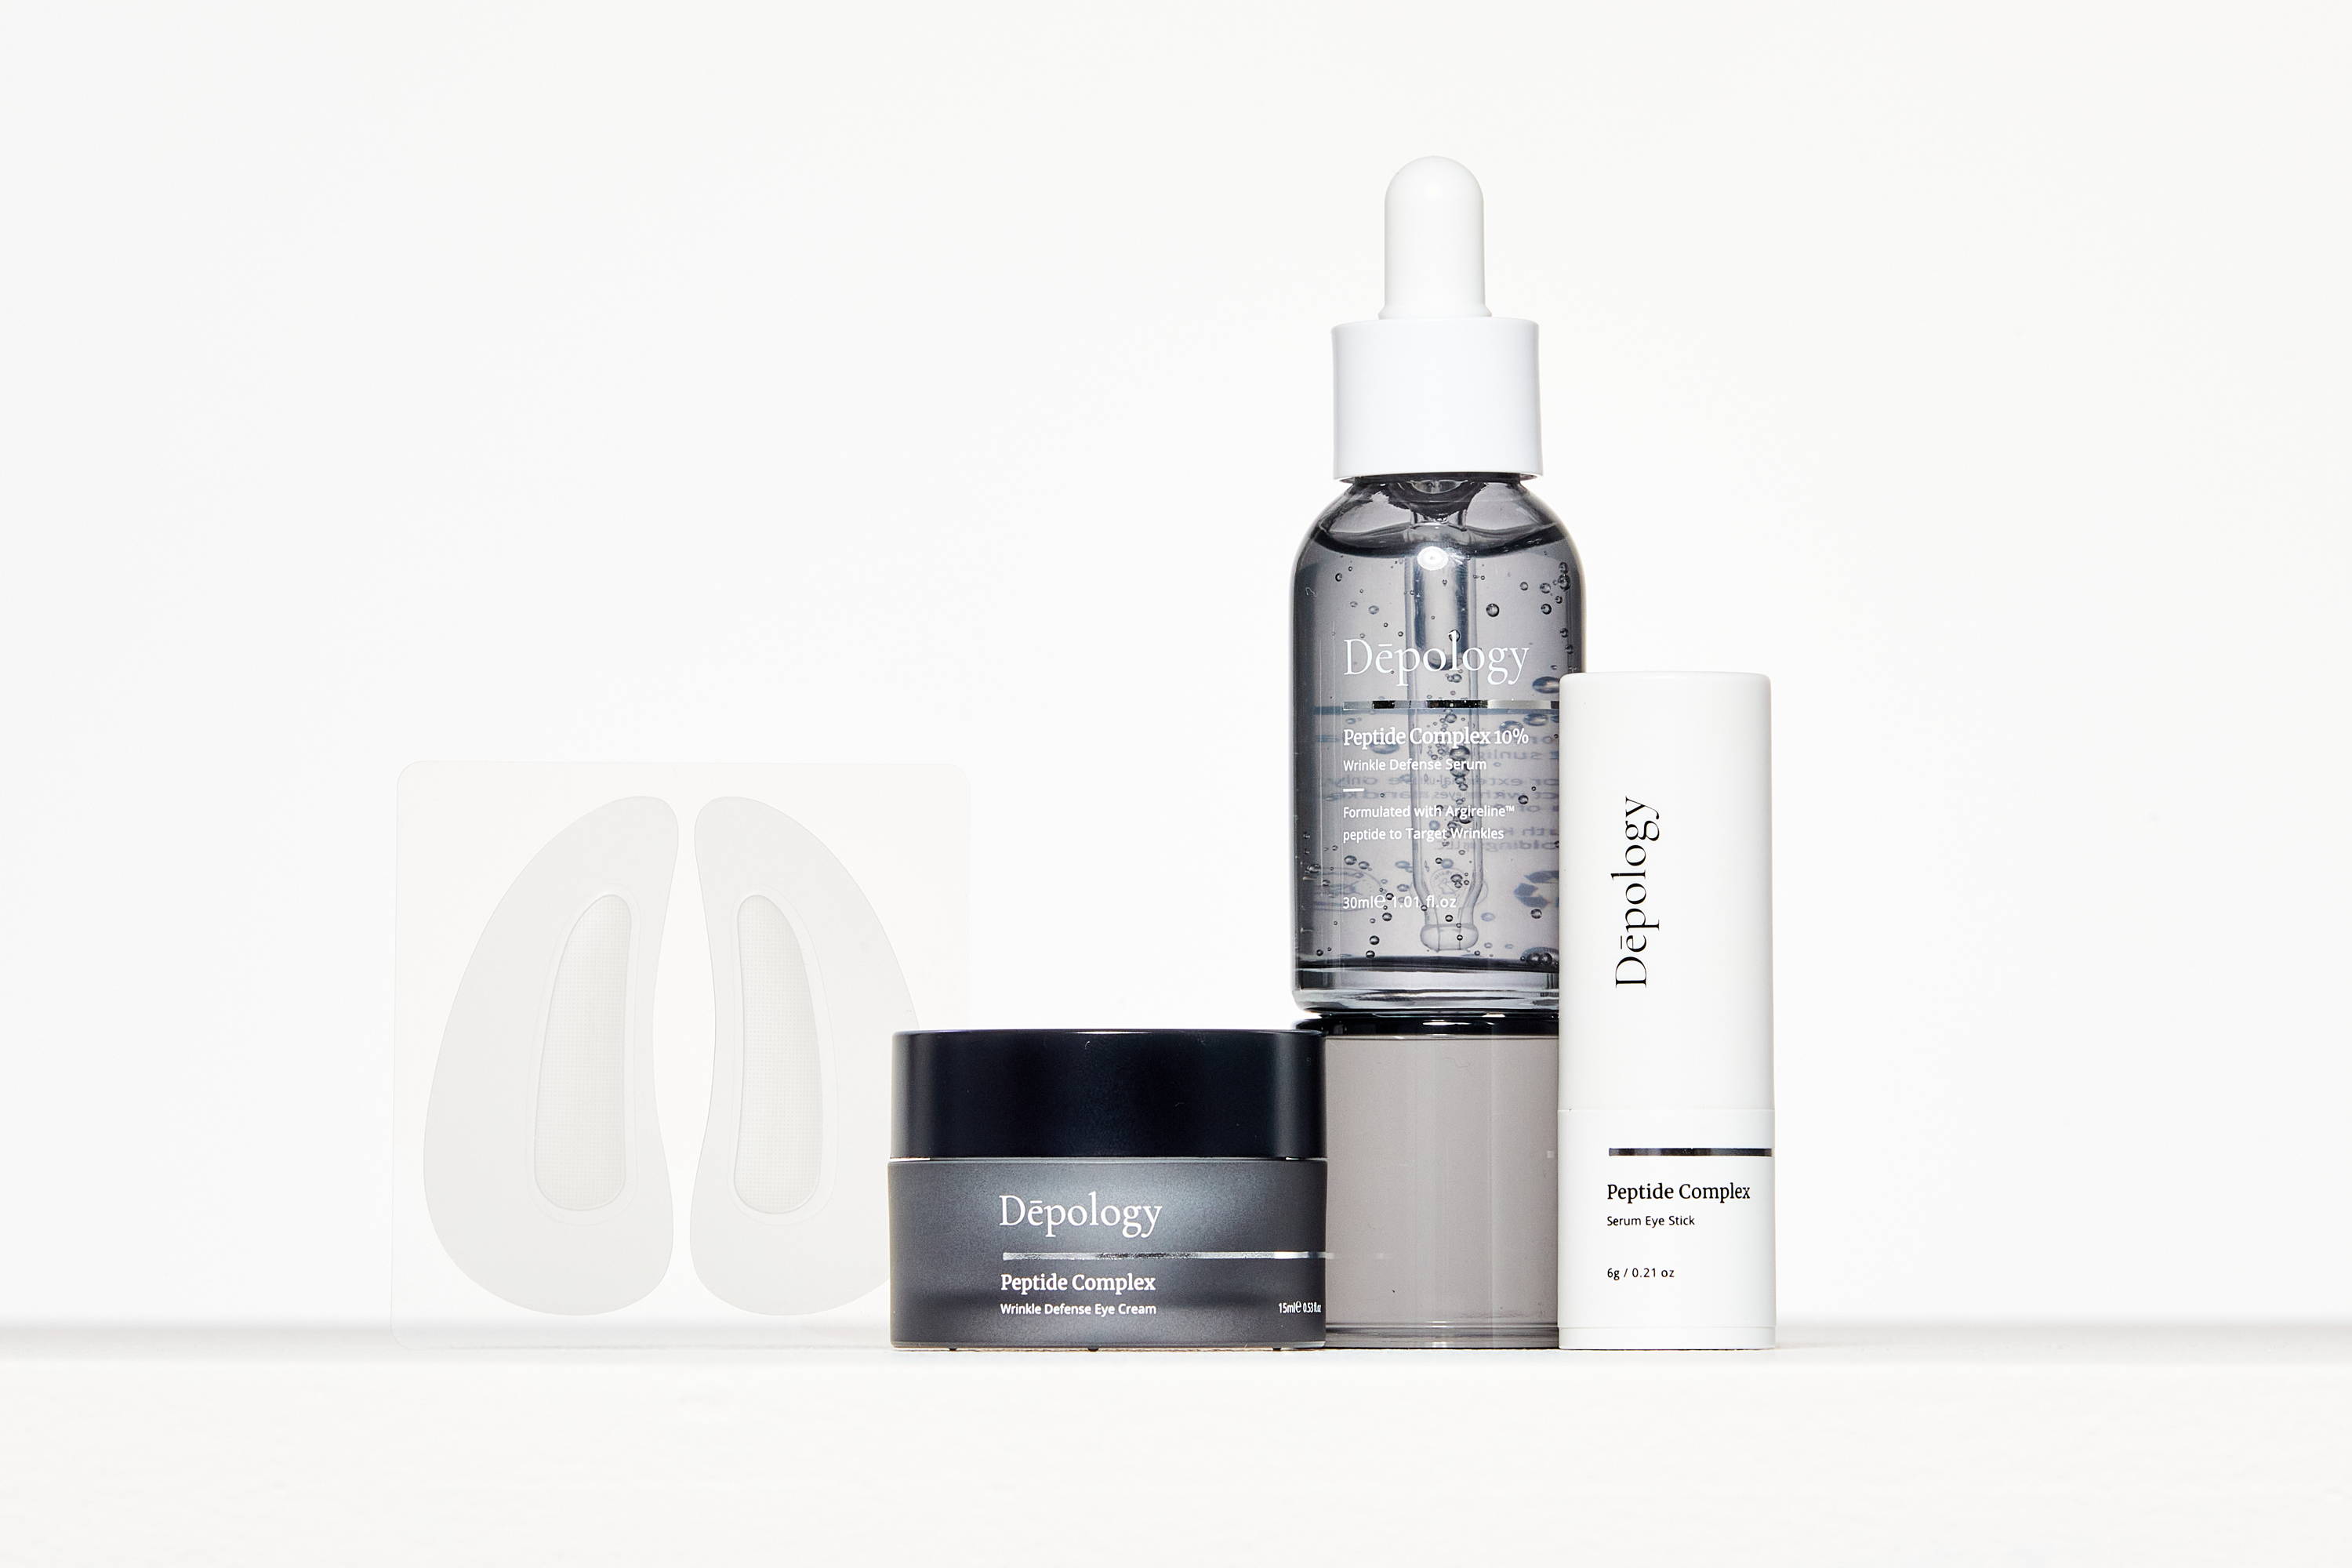 Depology Anti-aging skincare collection for women in their 40s